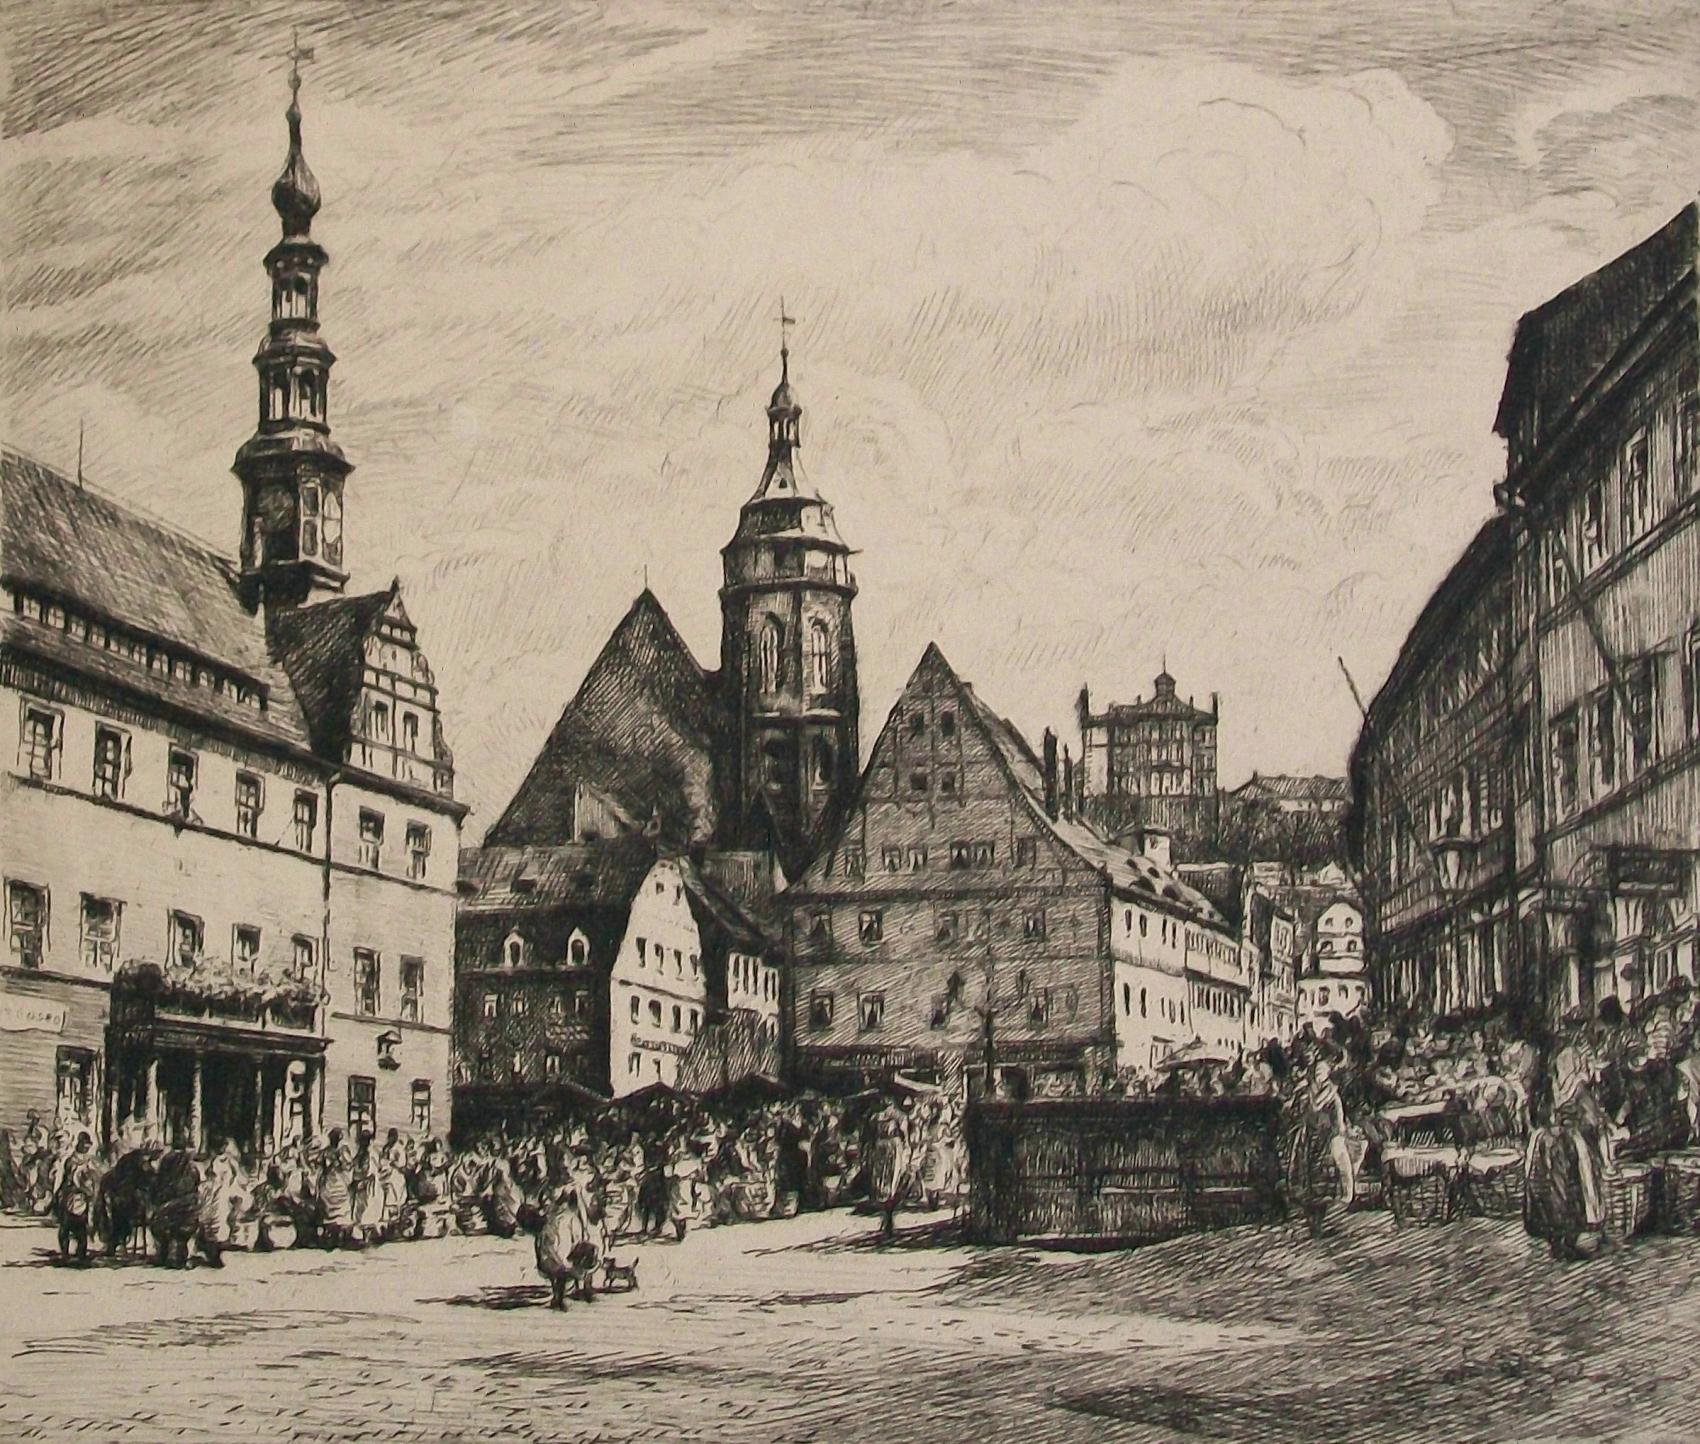 'The Market Square at Pirna' (After Bernardo Bellotto) - Antique copper plate engraving on paper - titled (in German) in pencil lower left - signed in pencil lower right (unidentified artist) - unframed - Germany - 18th/19th century. 

Good